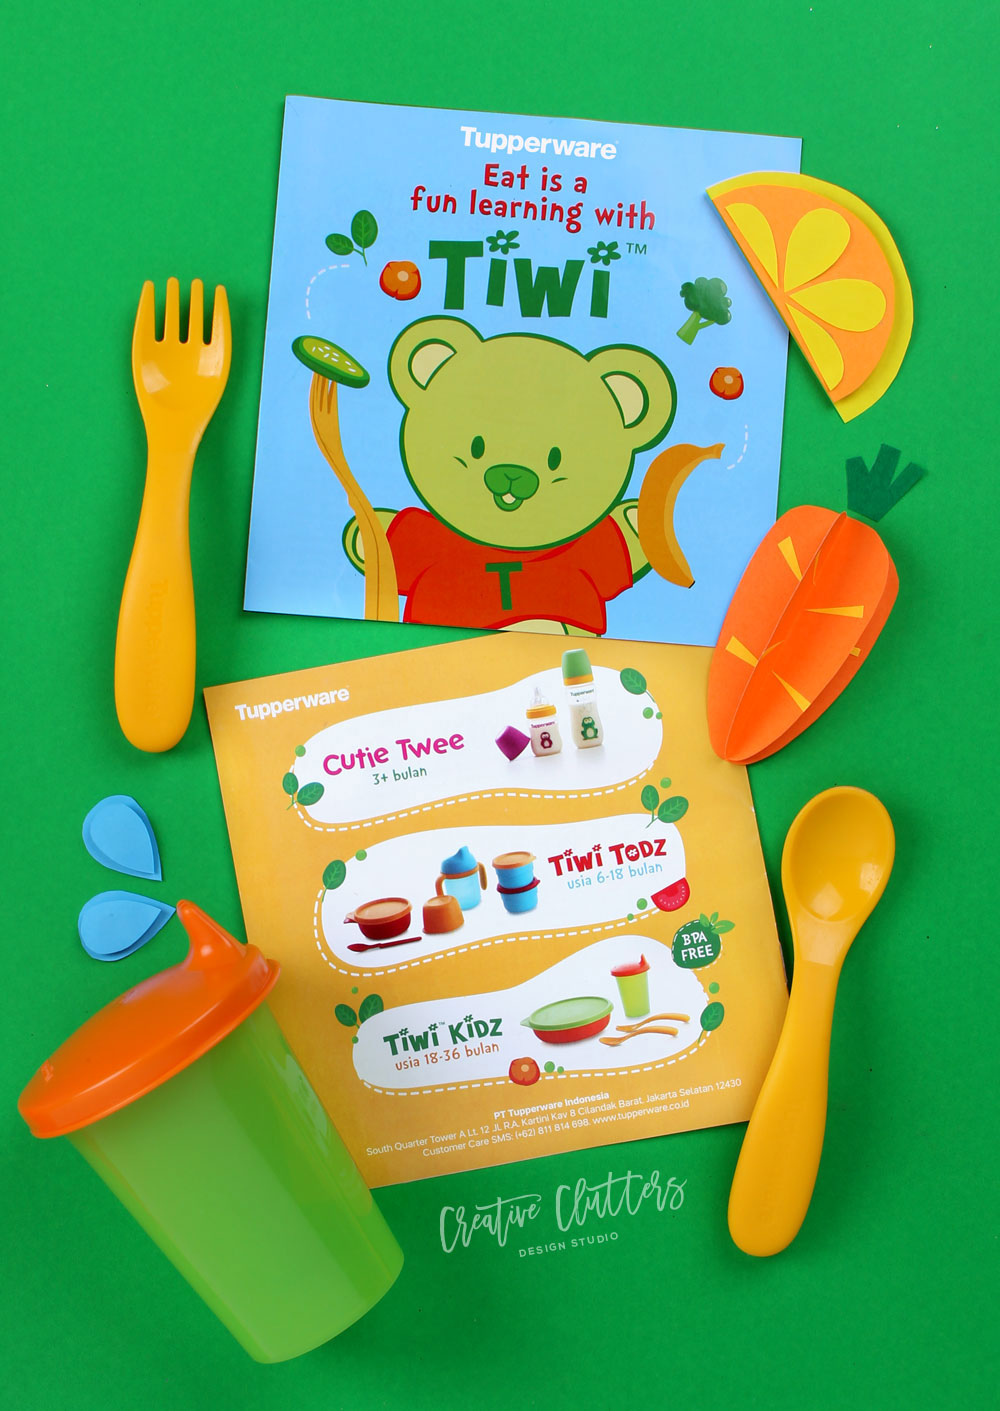 Illustration for Tupperware Kids Product Line, by Creative Clutters